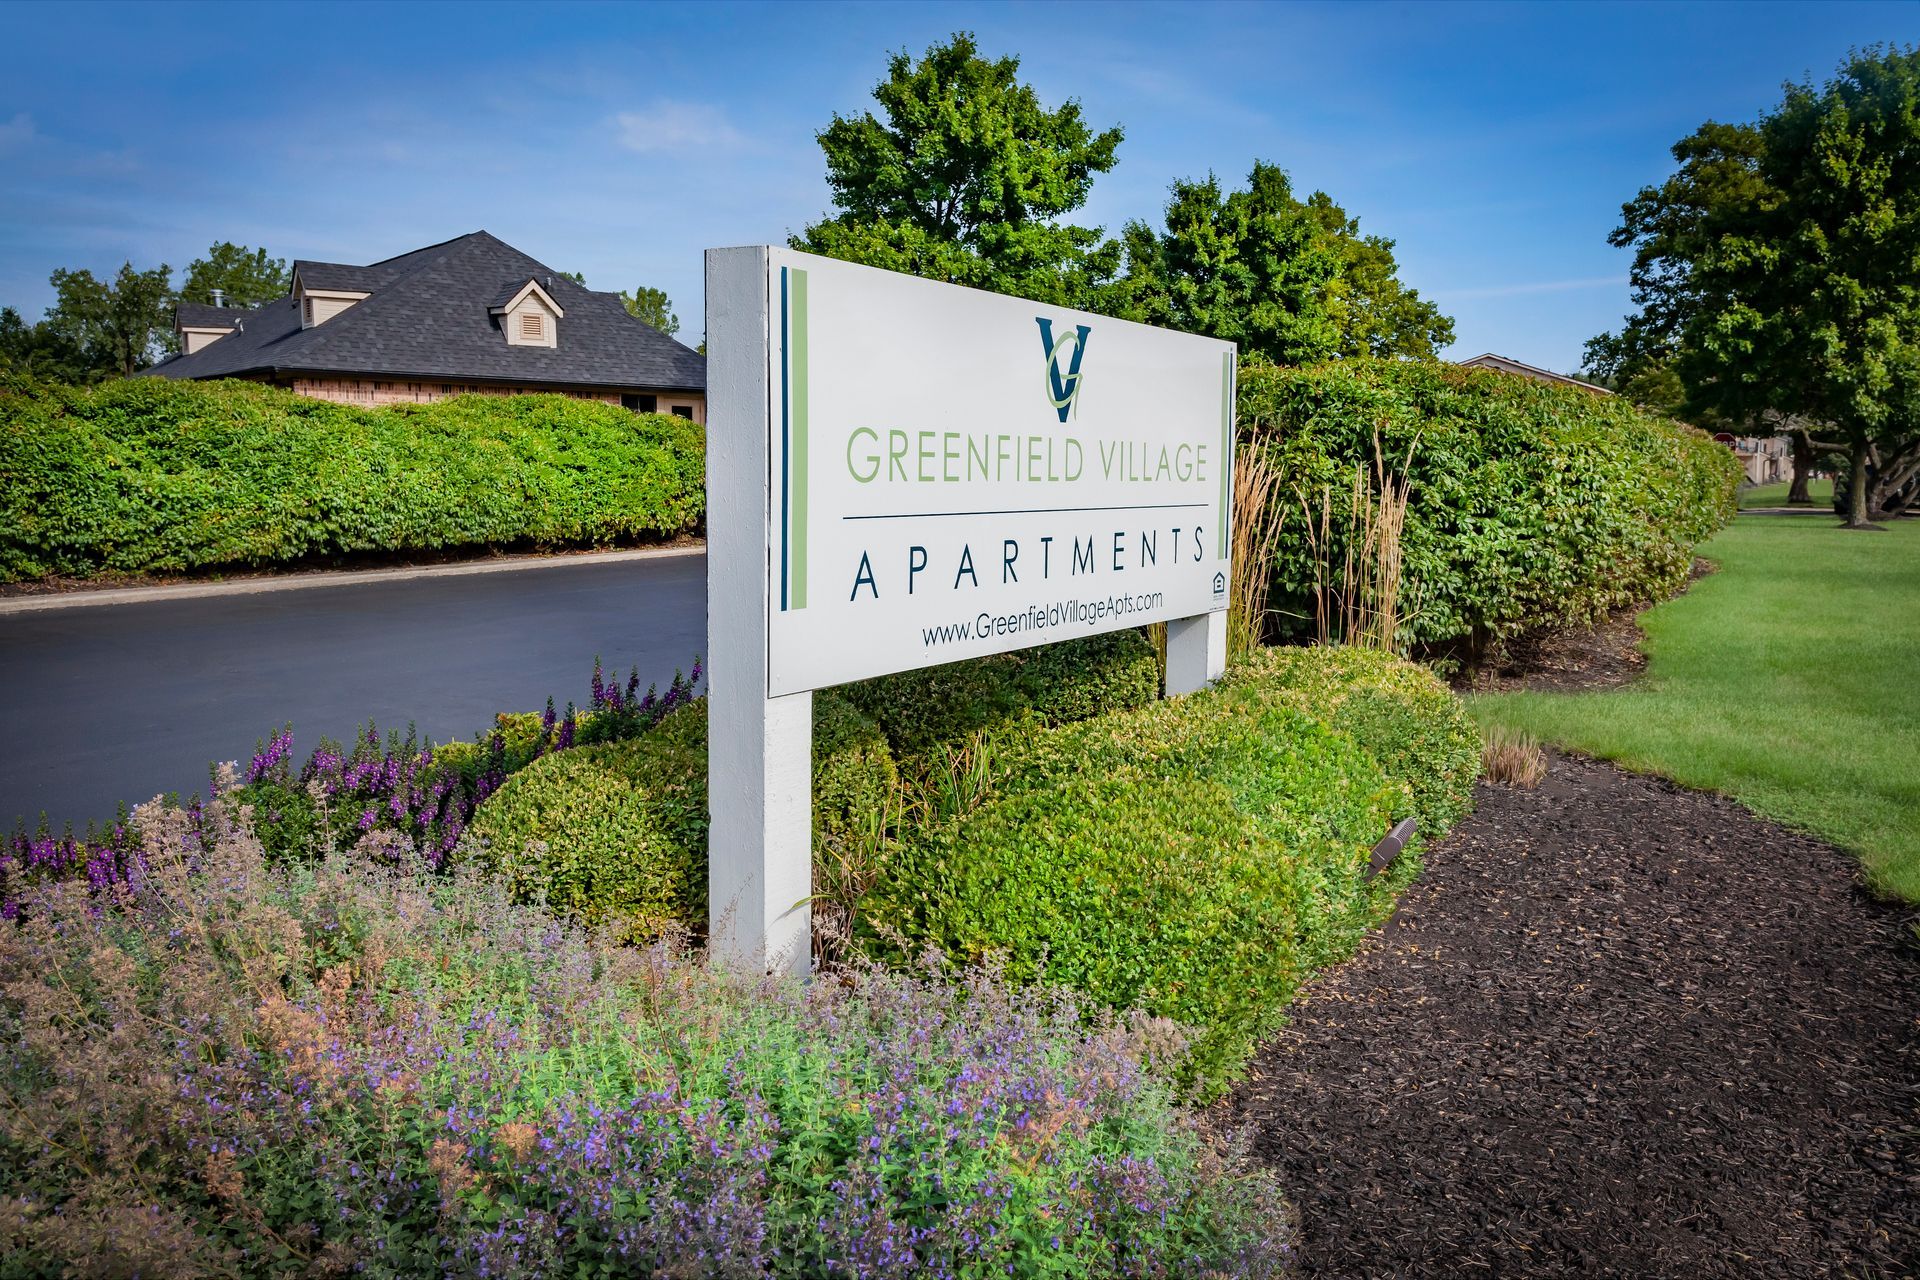 a sign for greenfield village apartments is surrounded by flowers  and bushes at Greenfield Village.